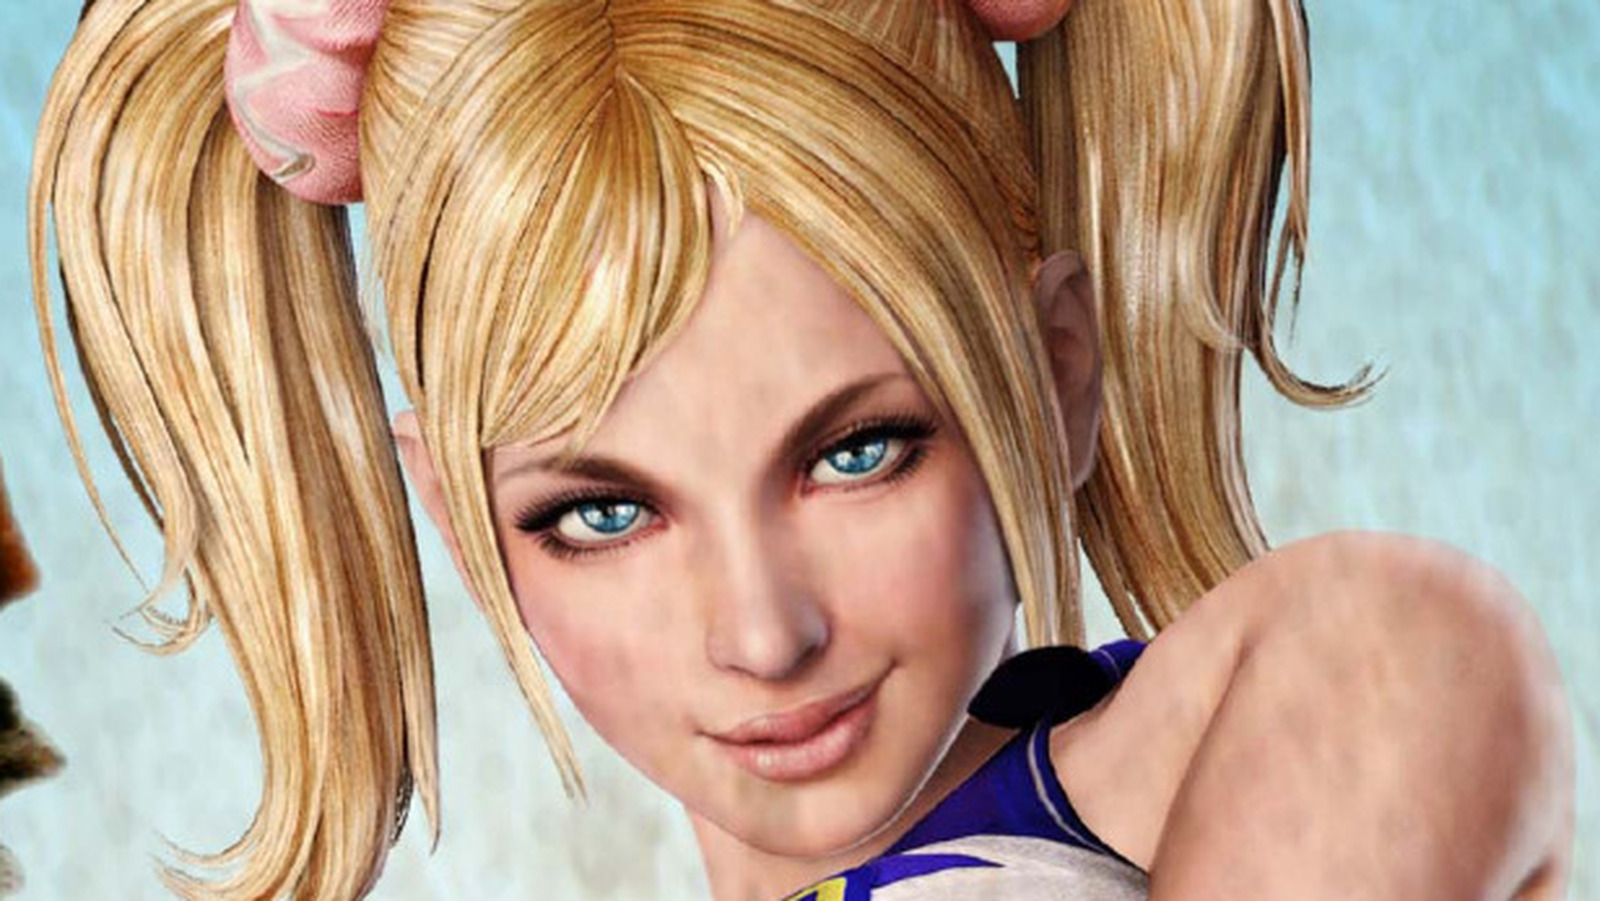 Lollipop Chainsaw remake coming 2023